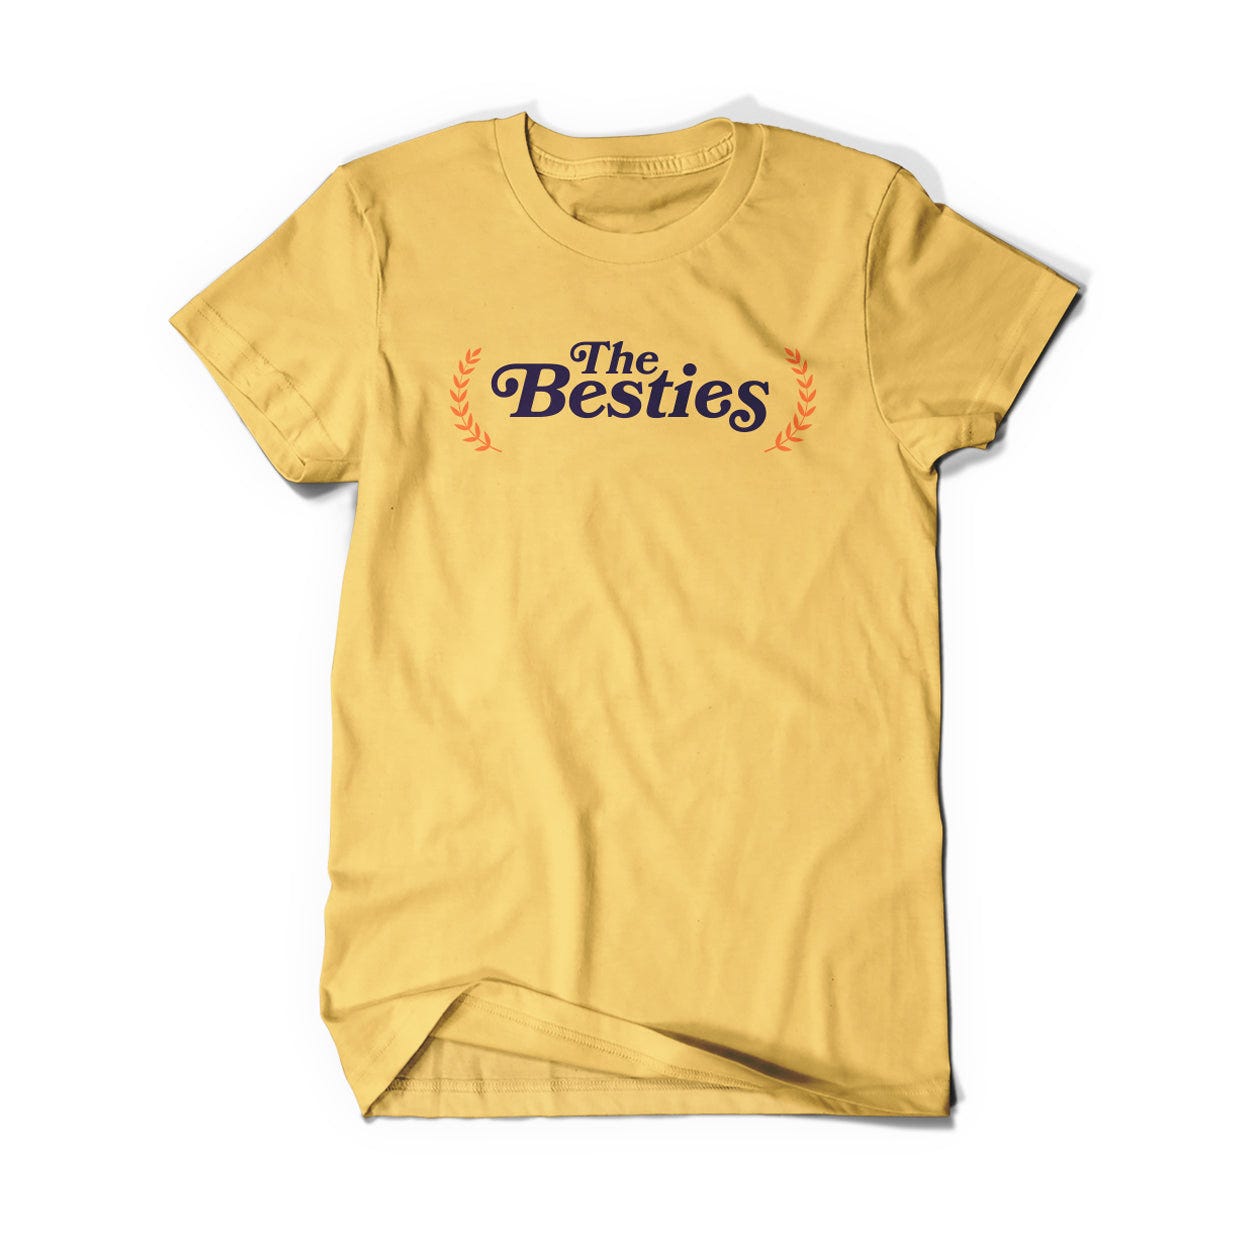 A gold shirt that says, "The Besties" in black serif font with an orange laurel on either side.